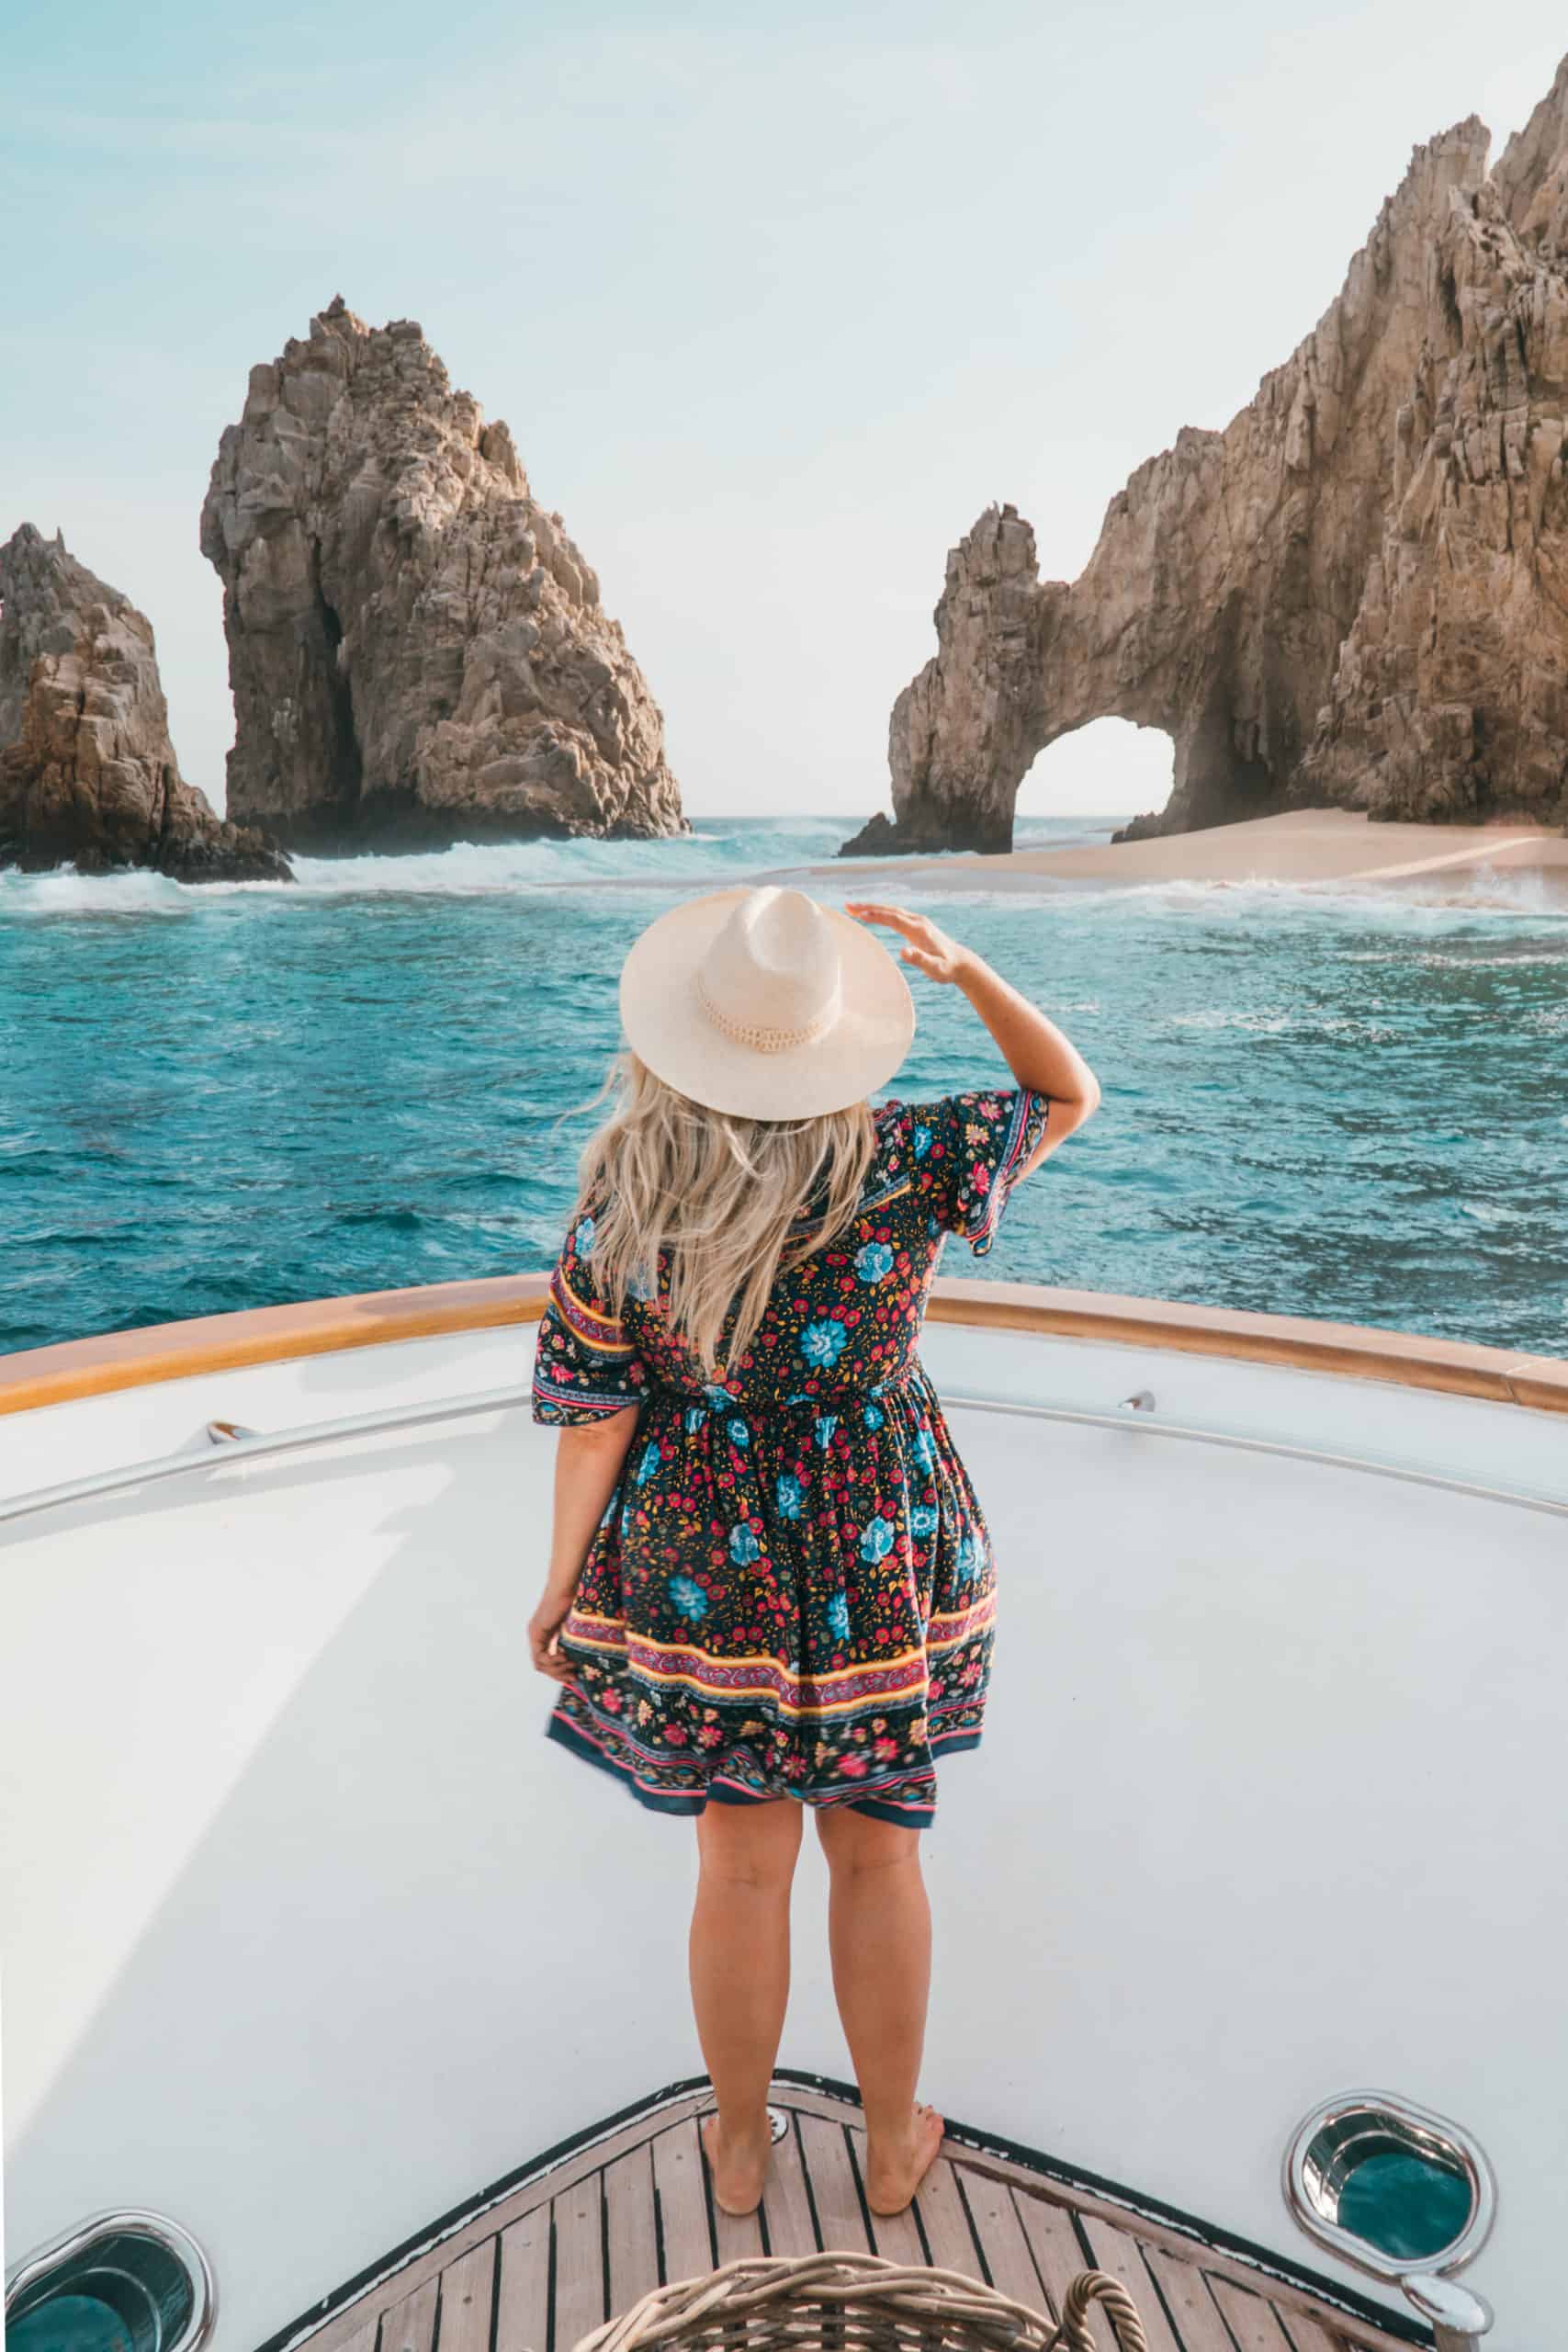 Checking out the arch from Contessa yacht in Cabo San Lucas, Mexico